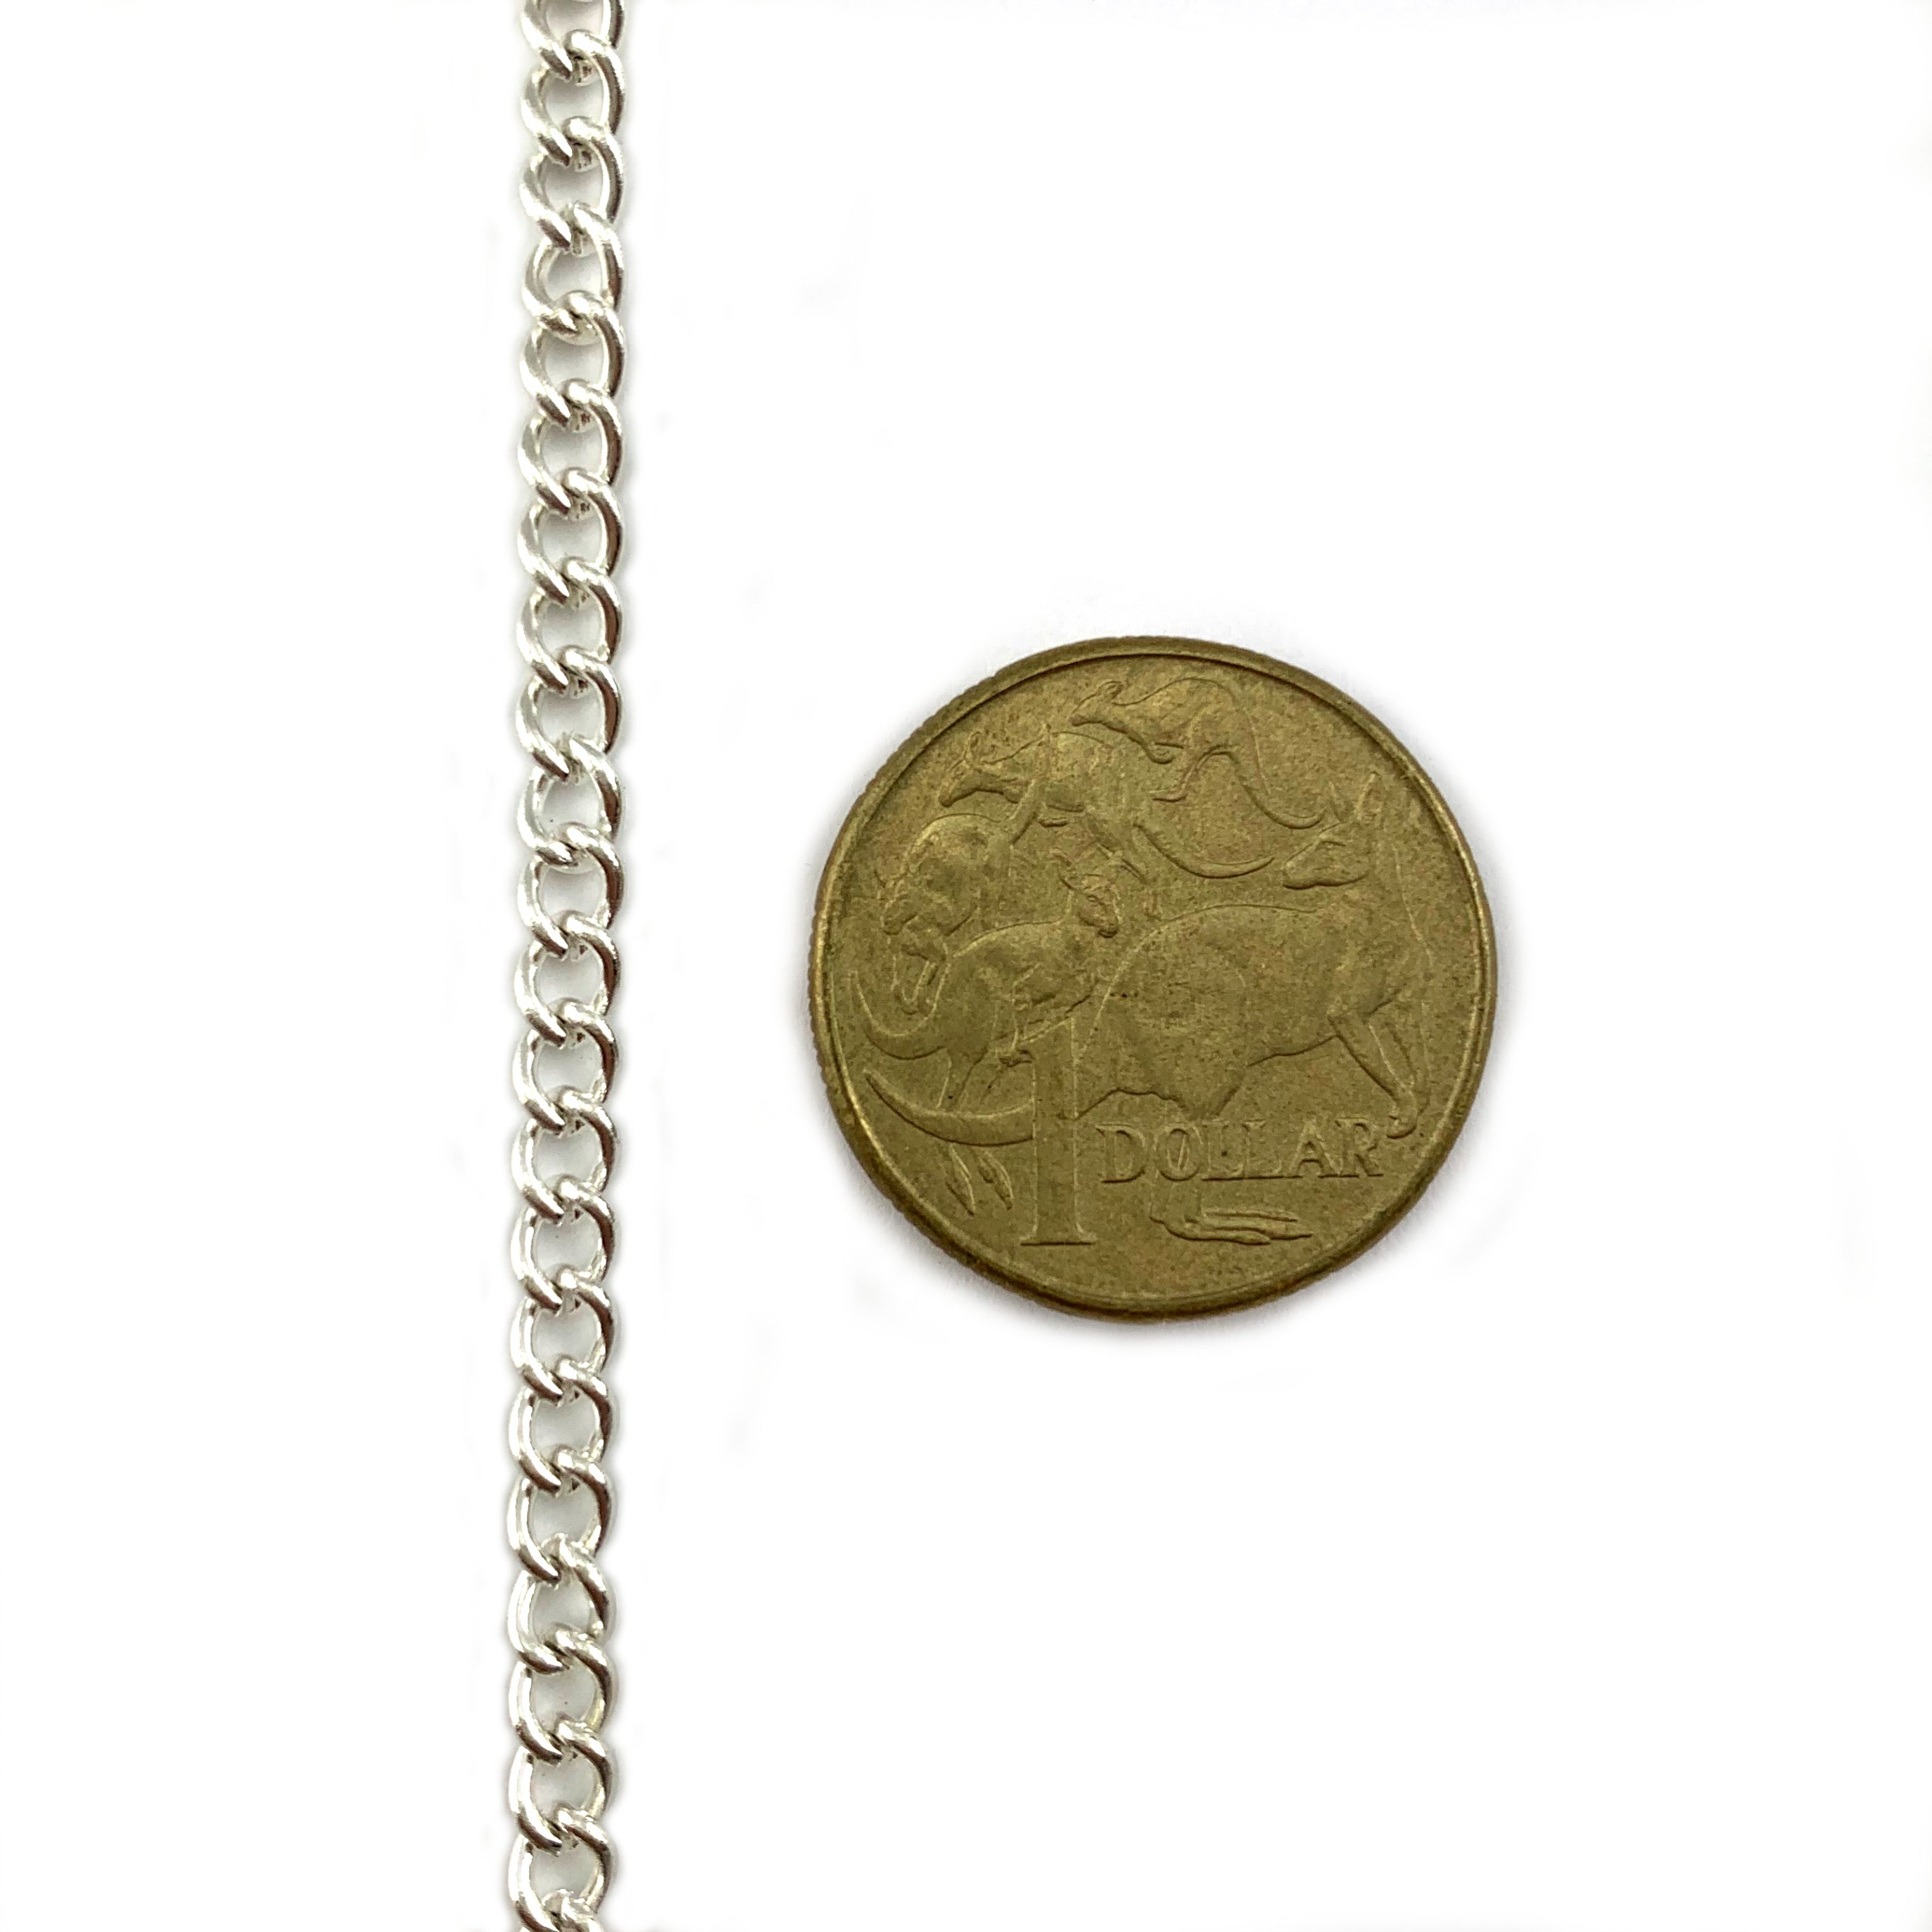 Curb Jewellery Chain, Silver Plated, size C100. Melbourne Australia.